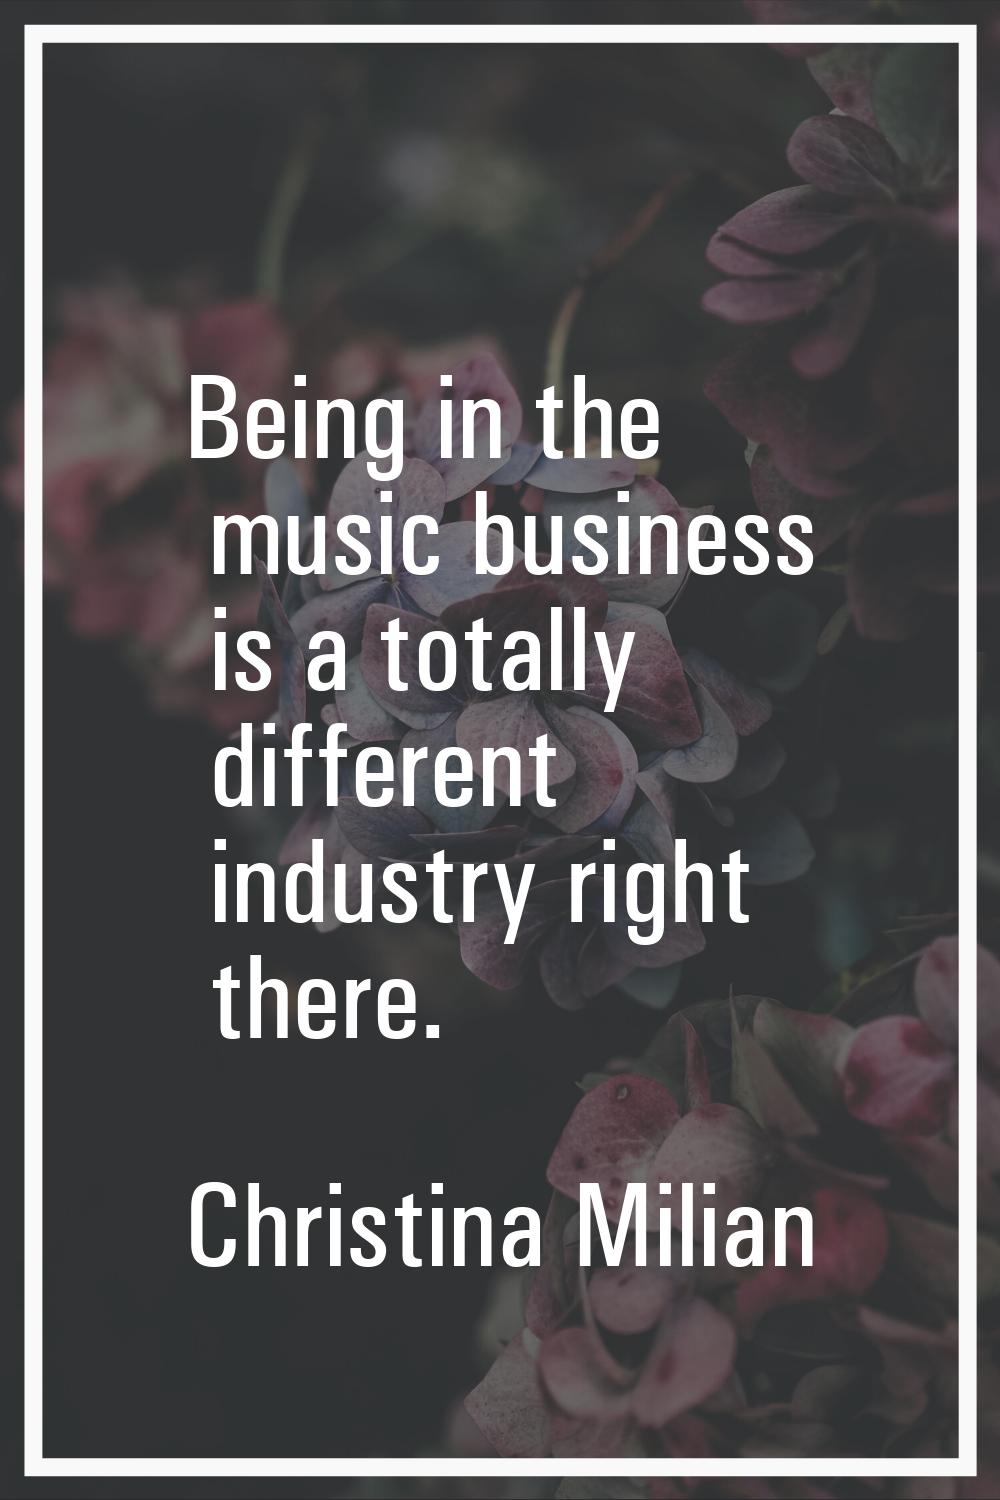 Being in the music business is a totally different industry right there.